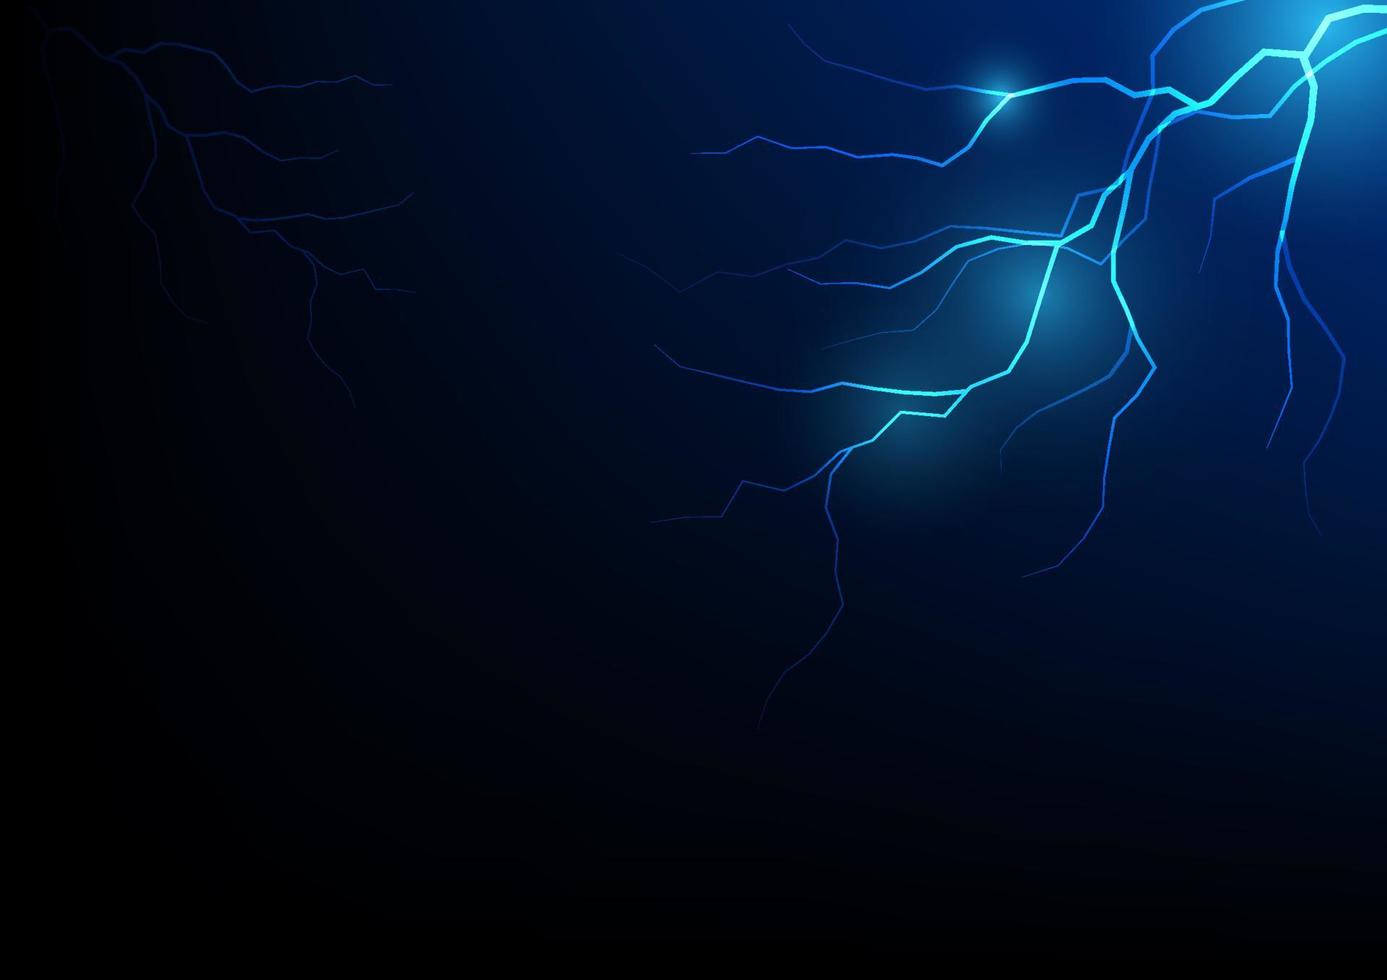 Thunder bolt lightning, realistic thunderstorm electricity flash vector illustration. Electric blue bright glowing danger light effect, abstract neon shock rays at night stormy sky dark background